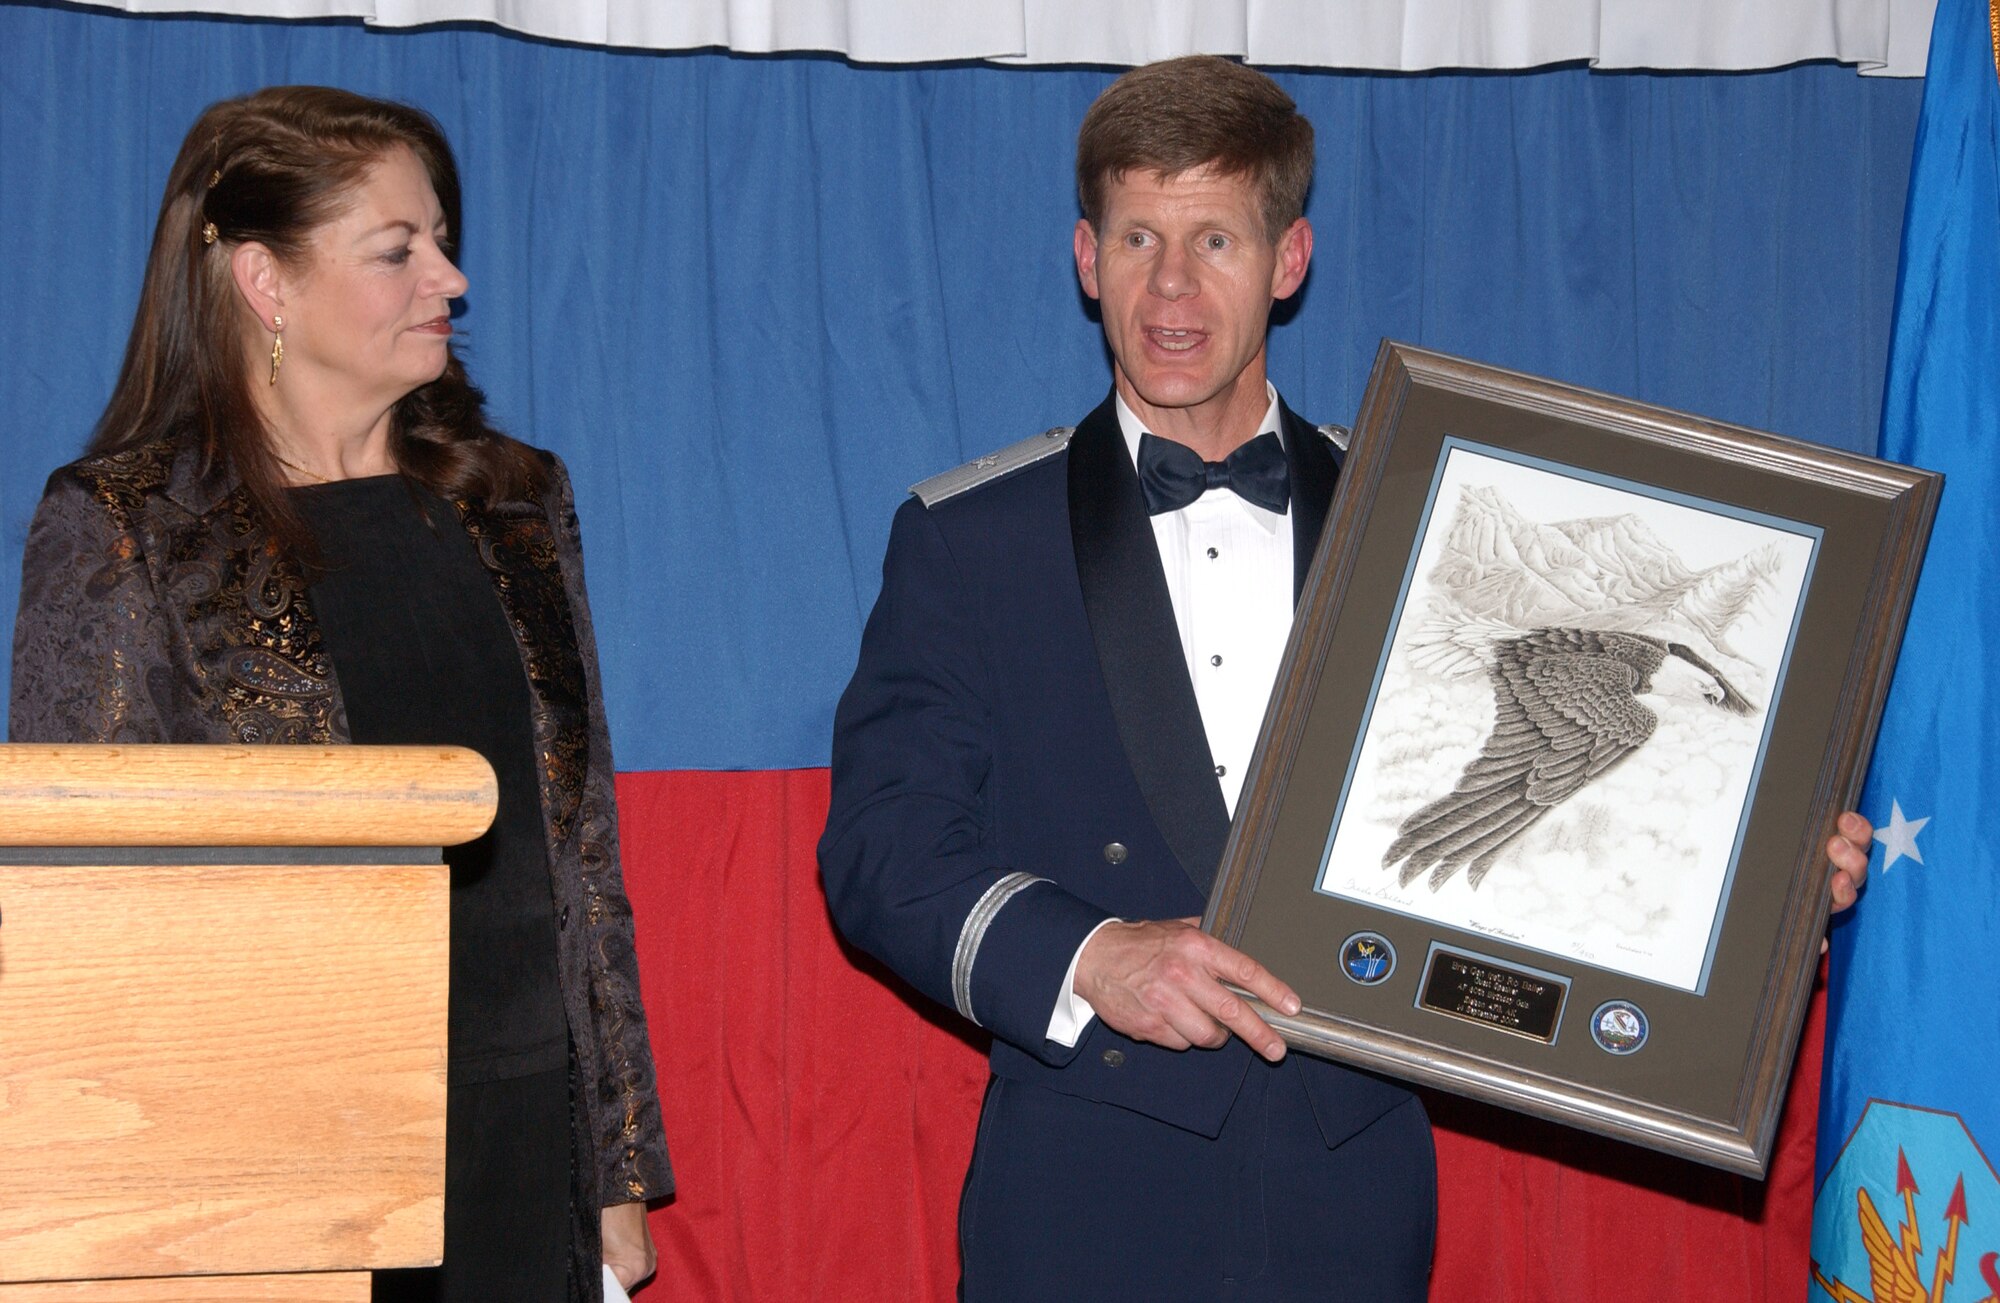 EIELSON AIR FORCE BASE, Alaska --  The local Interior civilian community supported the Air Force and the Iceman Team at the Gala. After her speech, retired Air Force Brig. Gen. Ro Bailey, University of Alaska Fairbanks vice chancellor, received a memento as a gesture of thanks from Brig. Gen. Mark Graper, 354th Fighter Wing commander.  (U.S. Air Force photo by Airman 1st Class Jonathan Snyder)